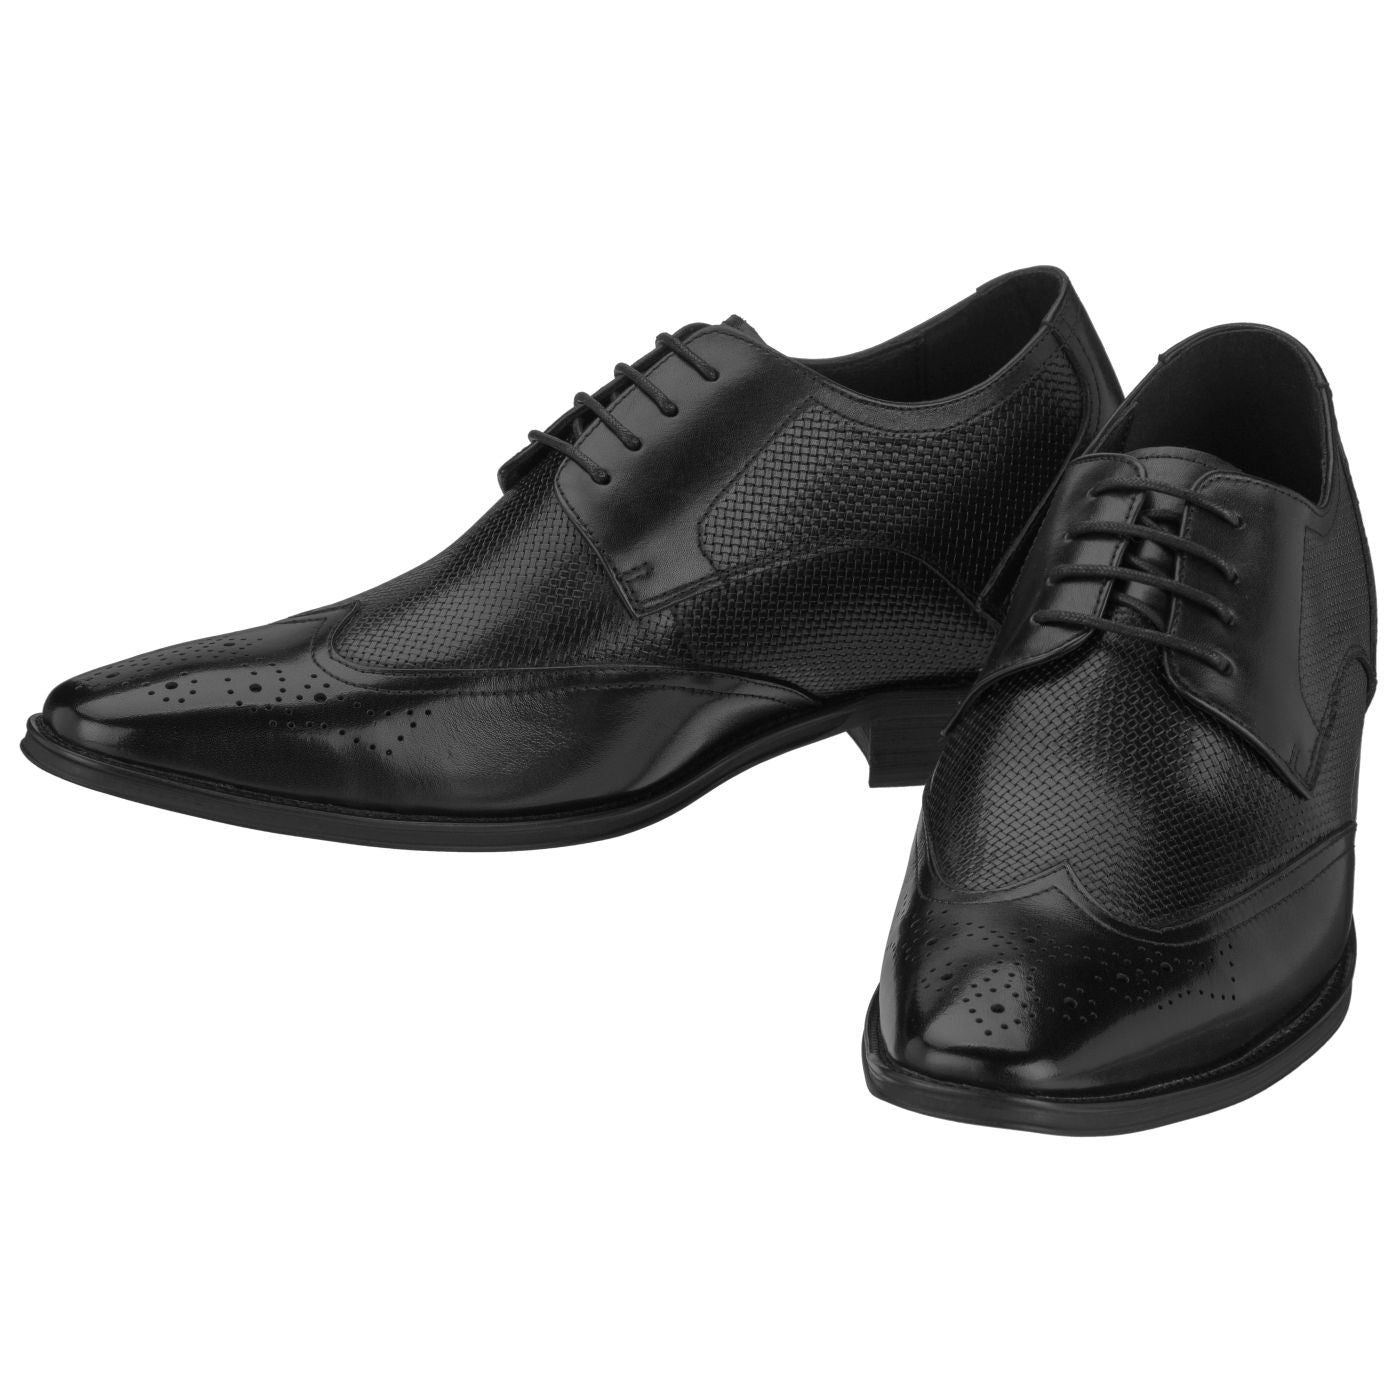 Elevator shoes height increase CALTO - Y5013 - 2.8 Inches Taller (Black)